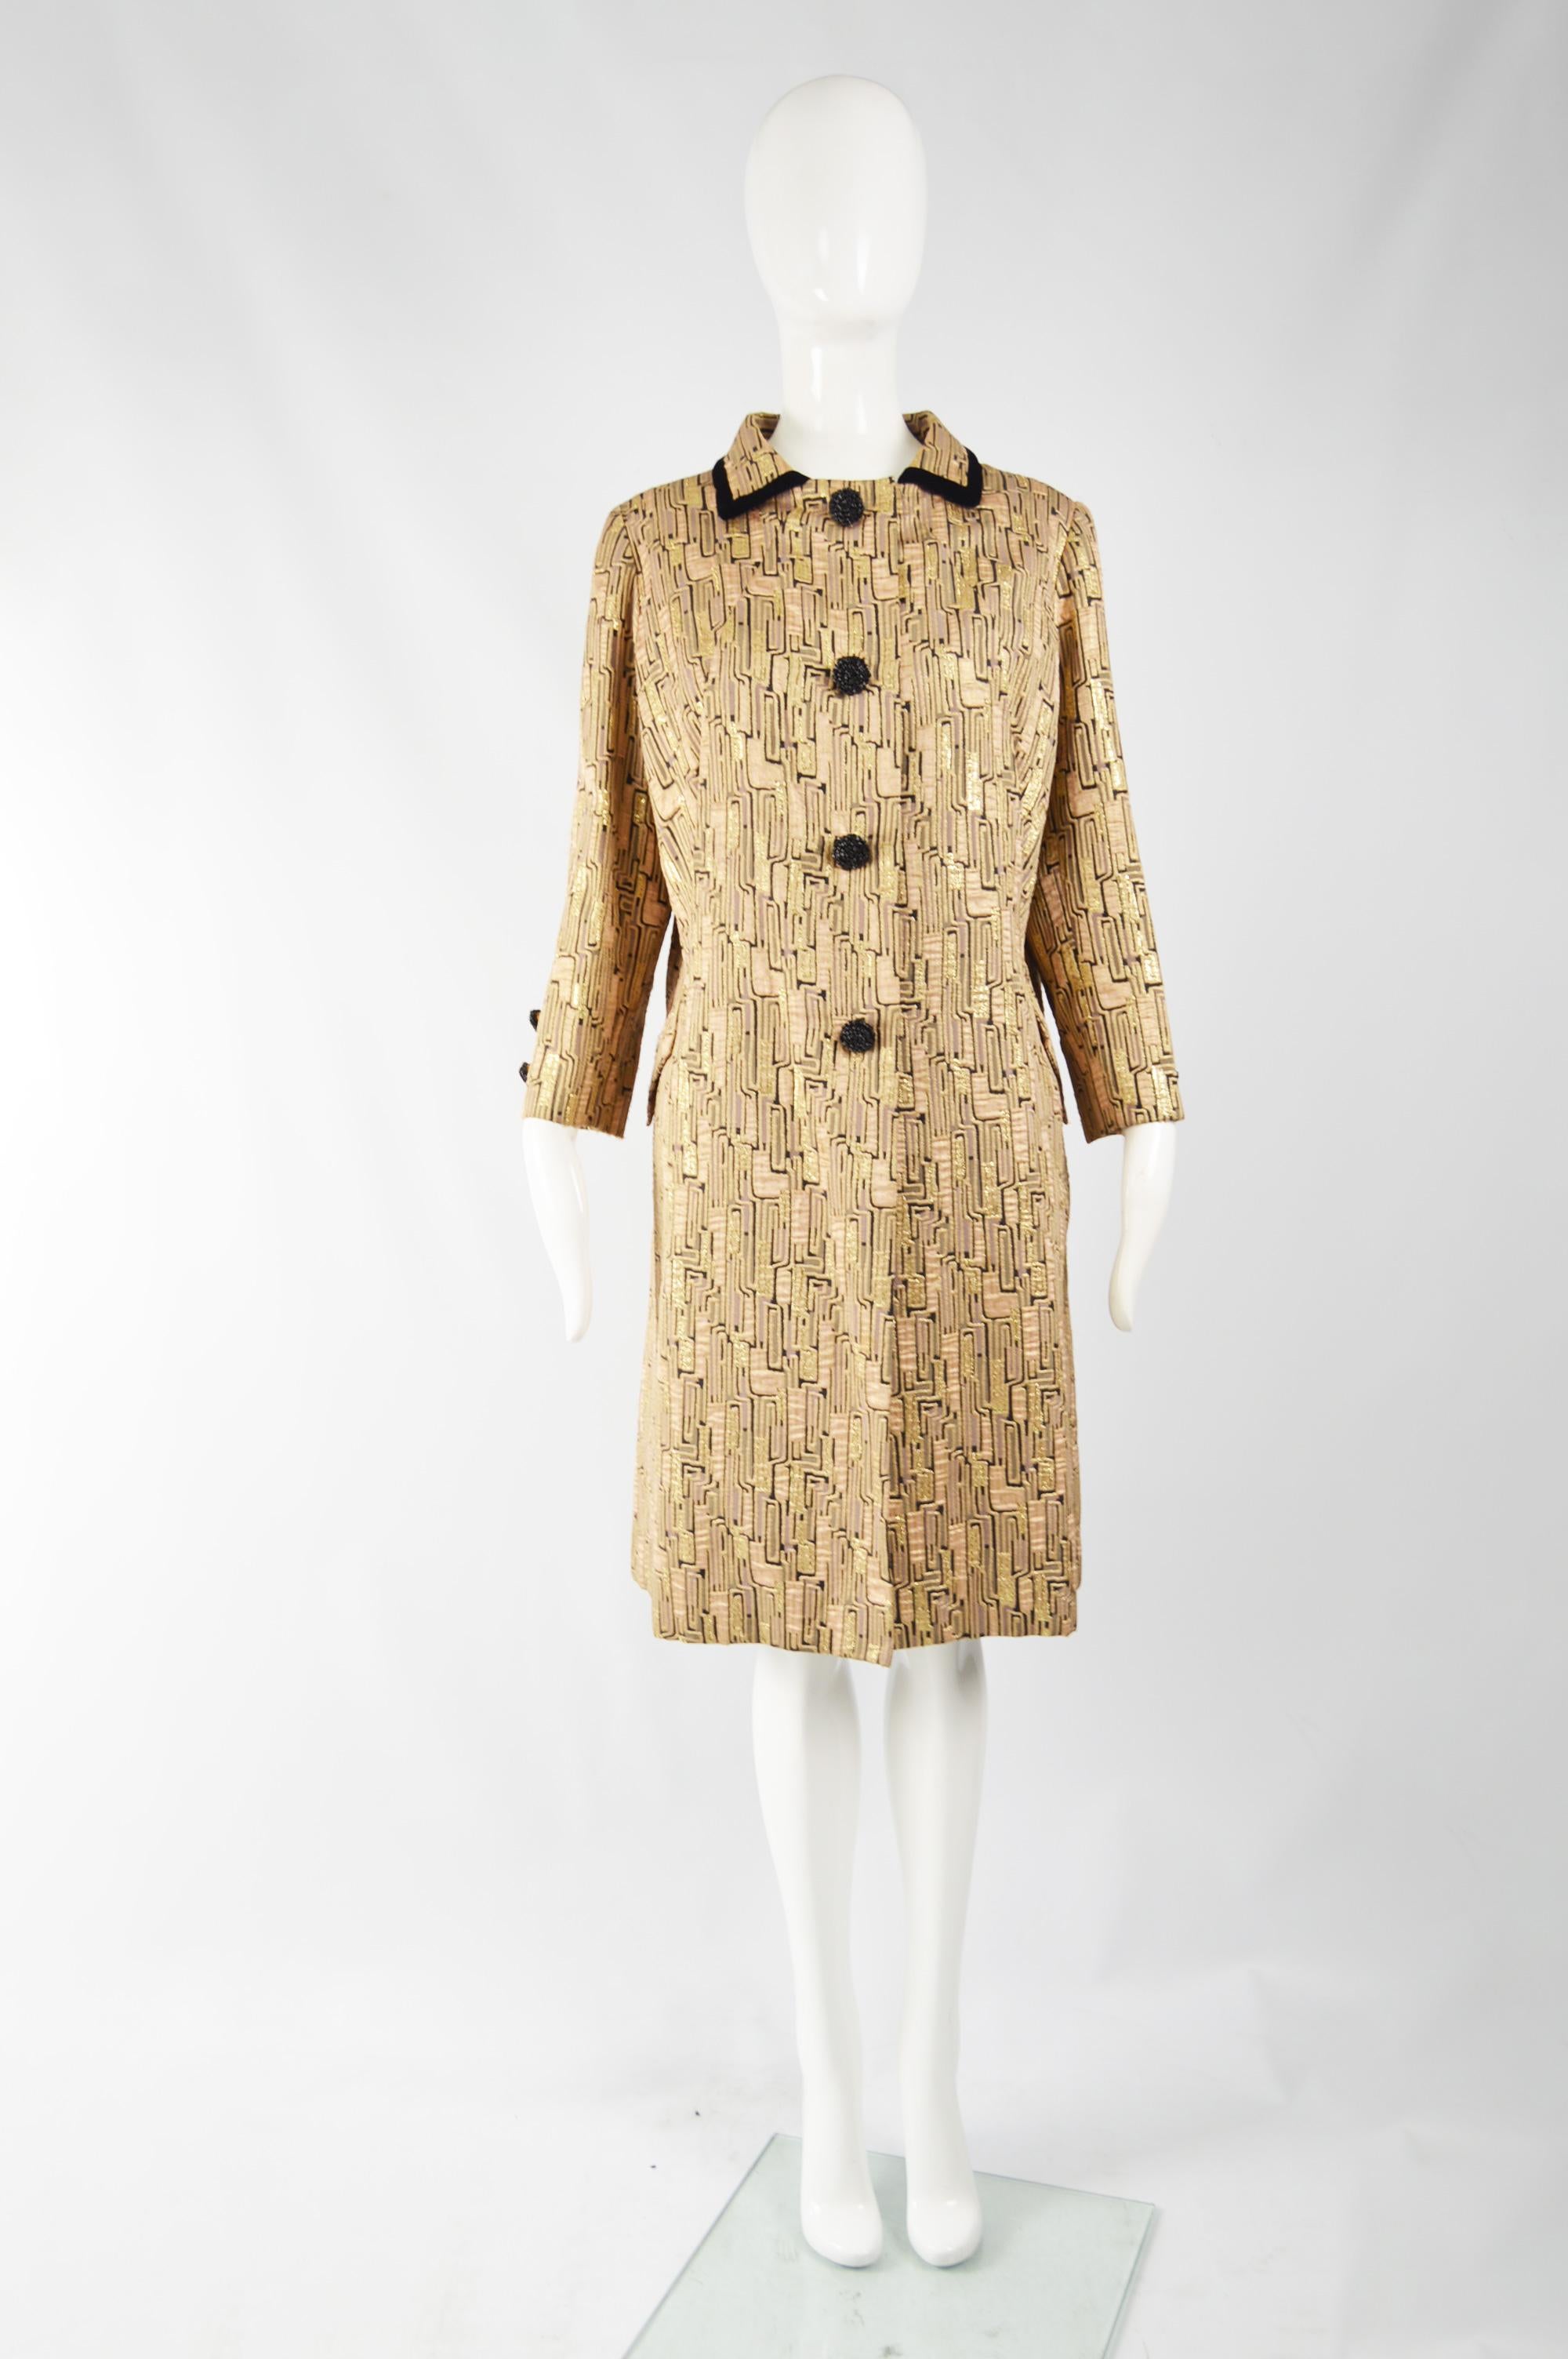 A fabulous vintage evening coat from the 60s by Violet Yorke. The fabric is a metallic bronze and gold brocade with a velvet trimmed collar. It has beaded buttons and a loose, swing fit.  

Size: Unlabelled; meant to have a large, swing fit so would